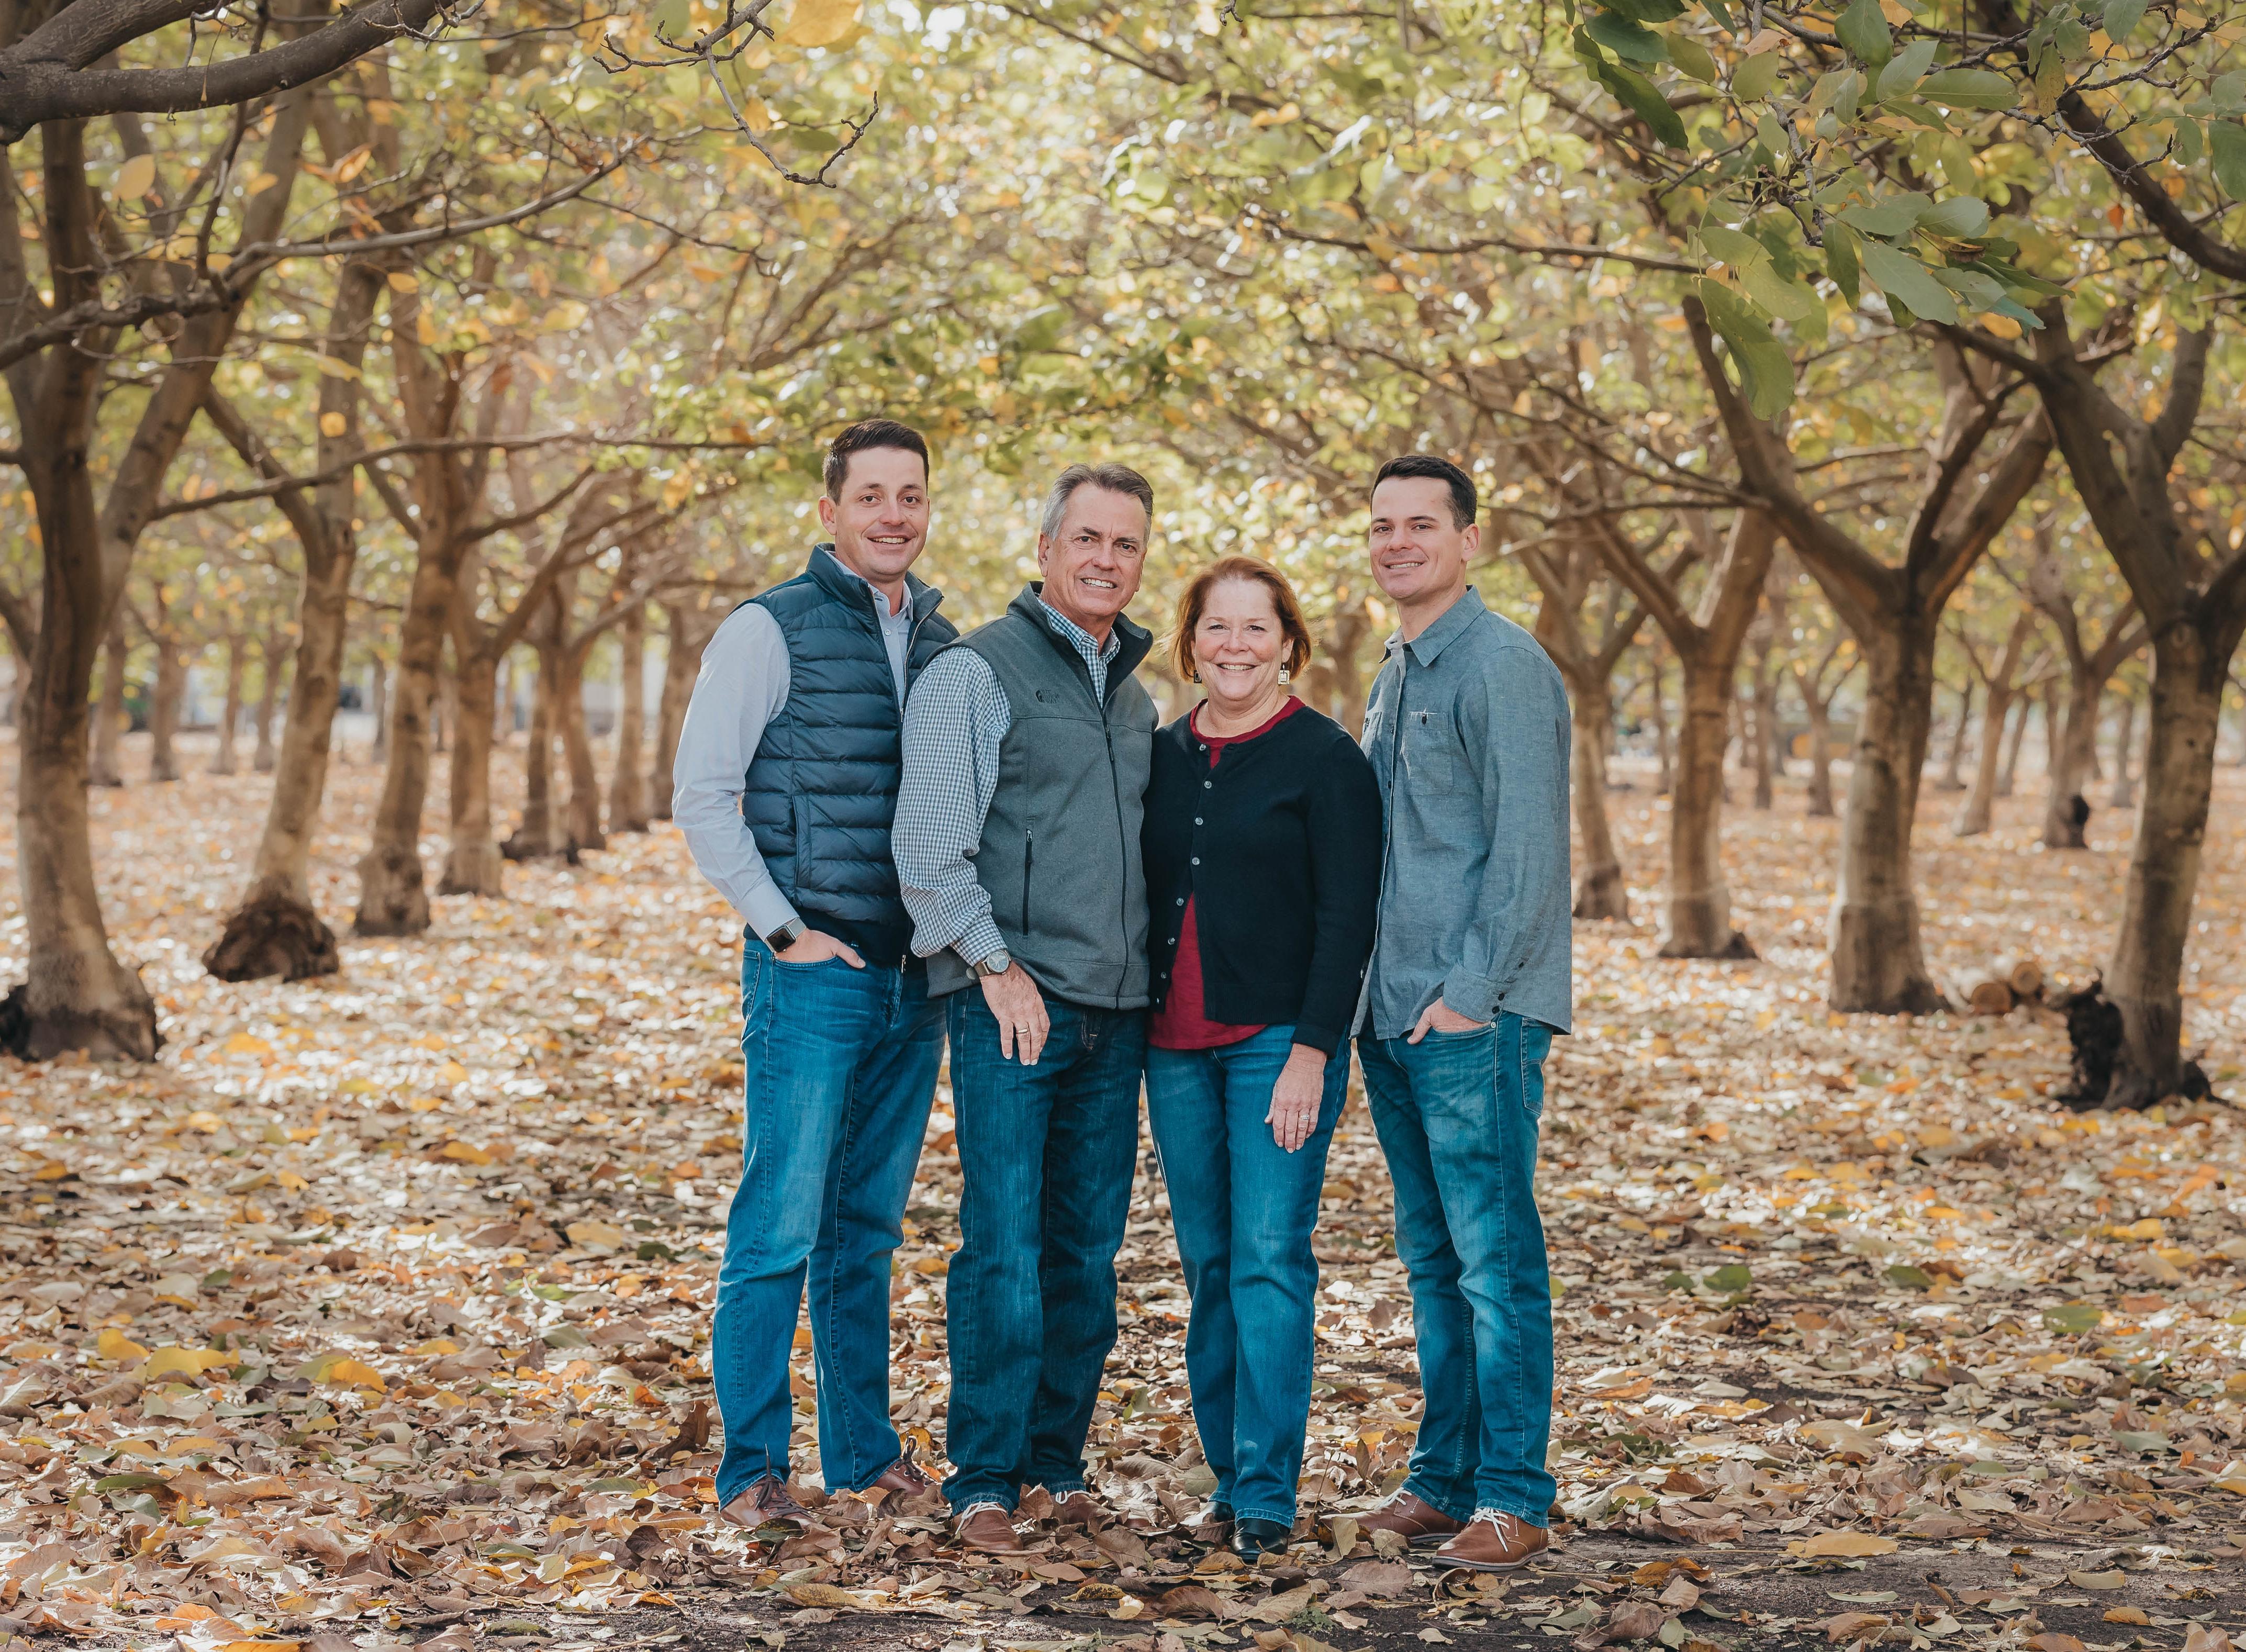 Tod standing at an orchard with his wife and two sons